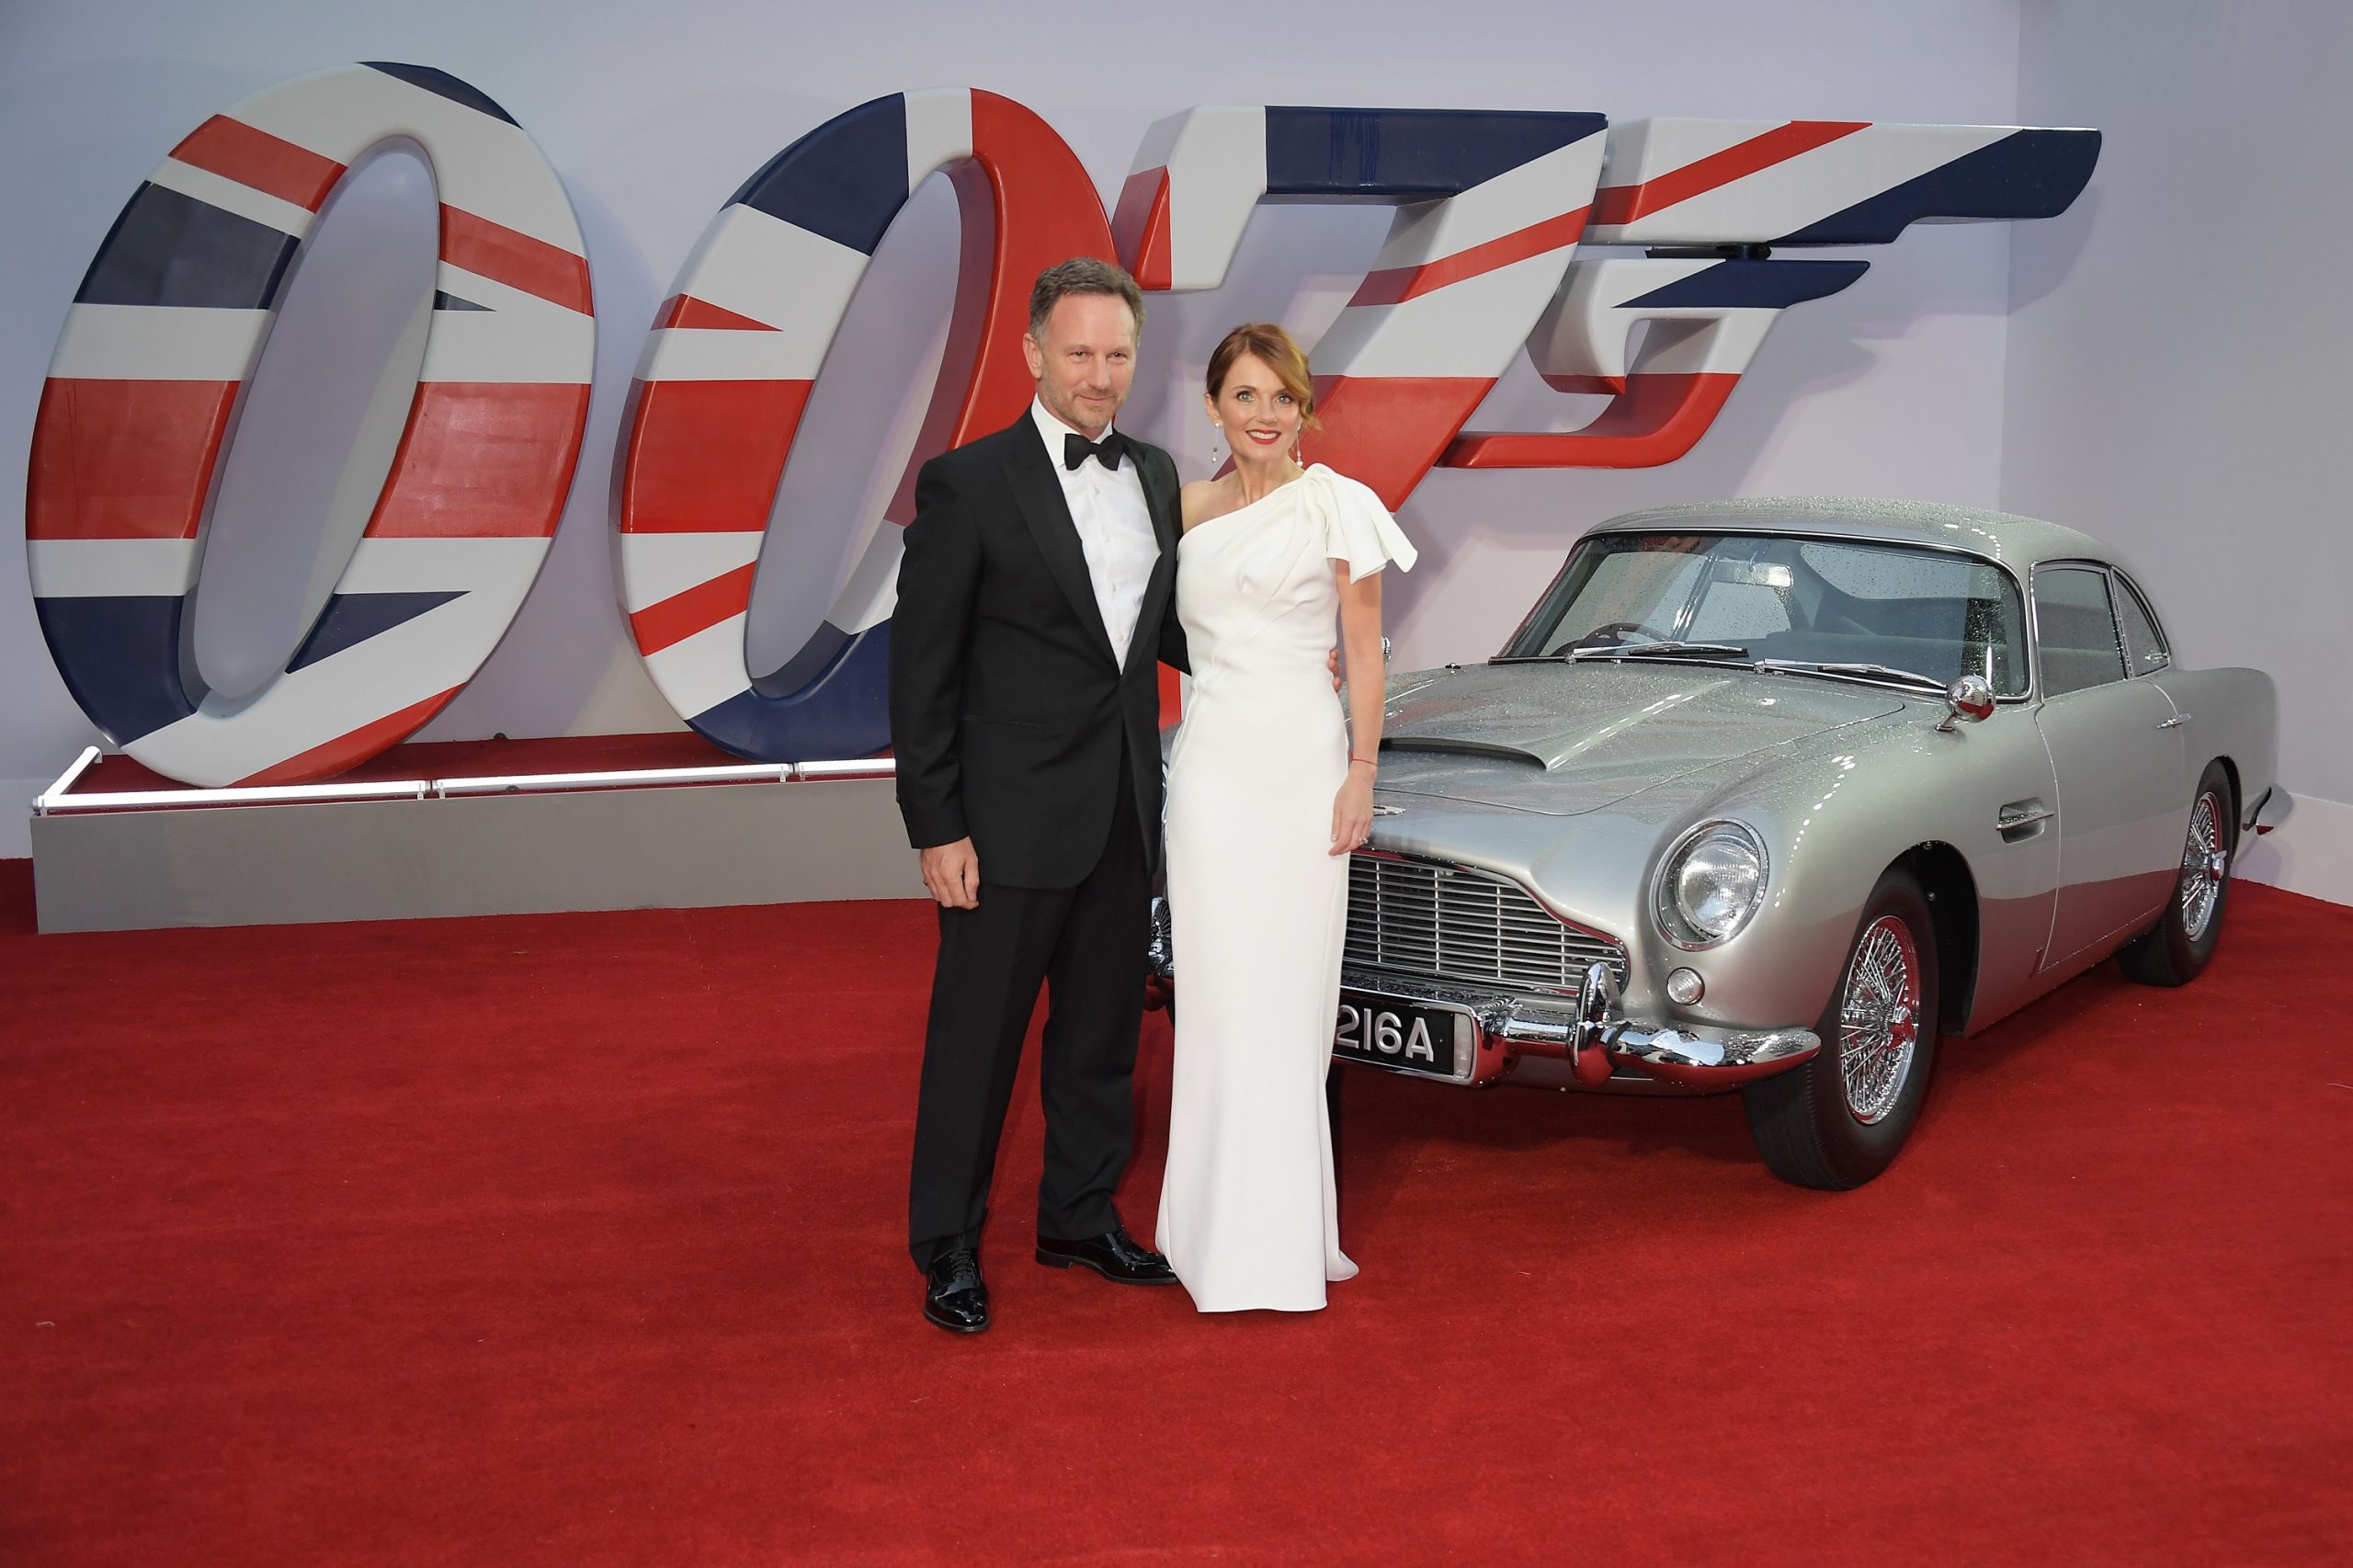 Christian and Geri Horner at the "No Time to Die" premier, with an Aston Martin DB5 in the background